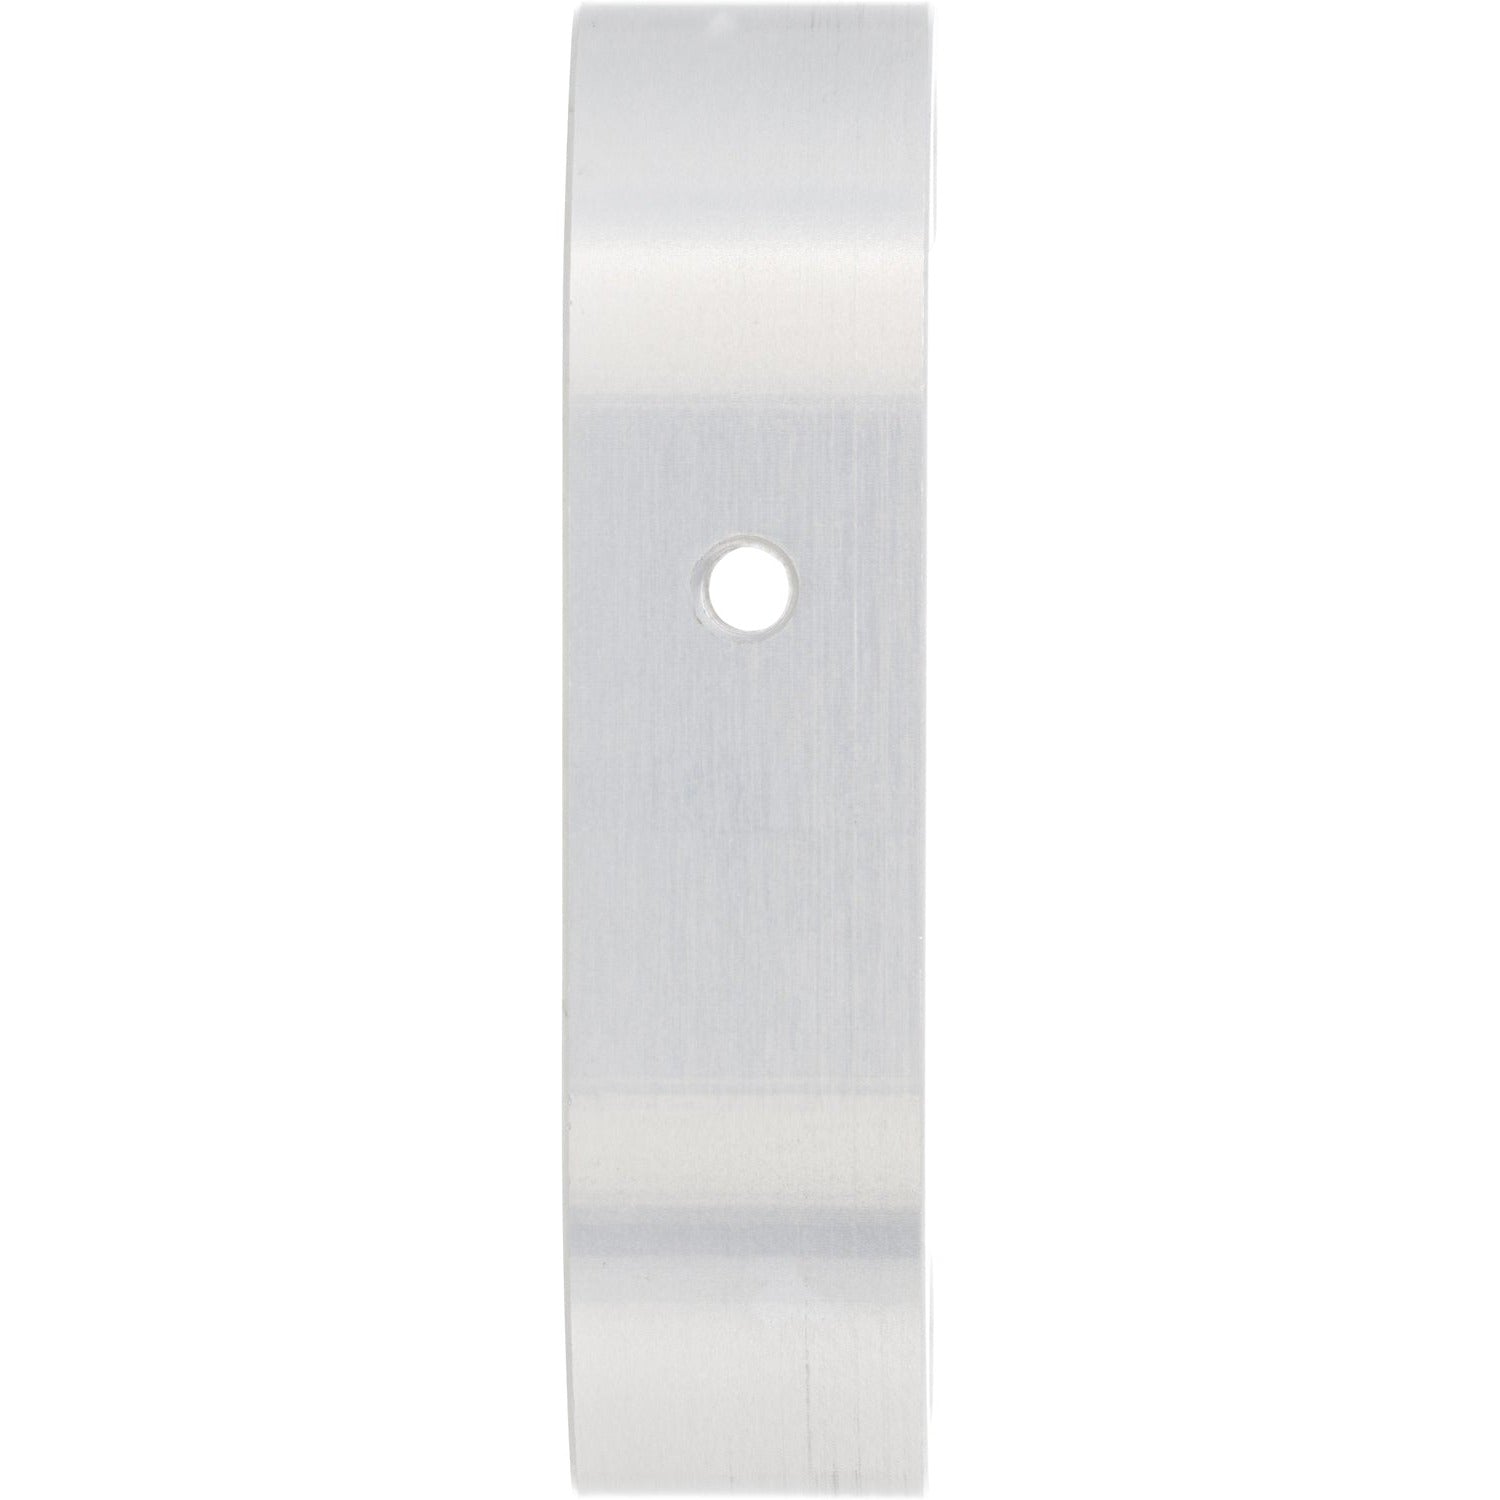 Grey hard anodized aluminum part with two through holes on the side of the part and one M3 threaded hole on the front surface. Part shown on white background. 